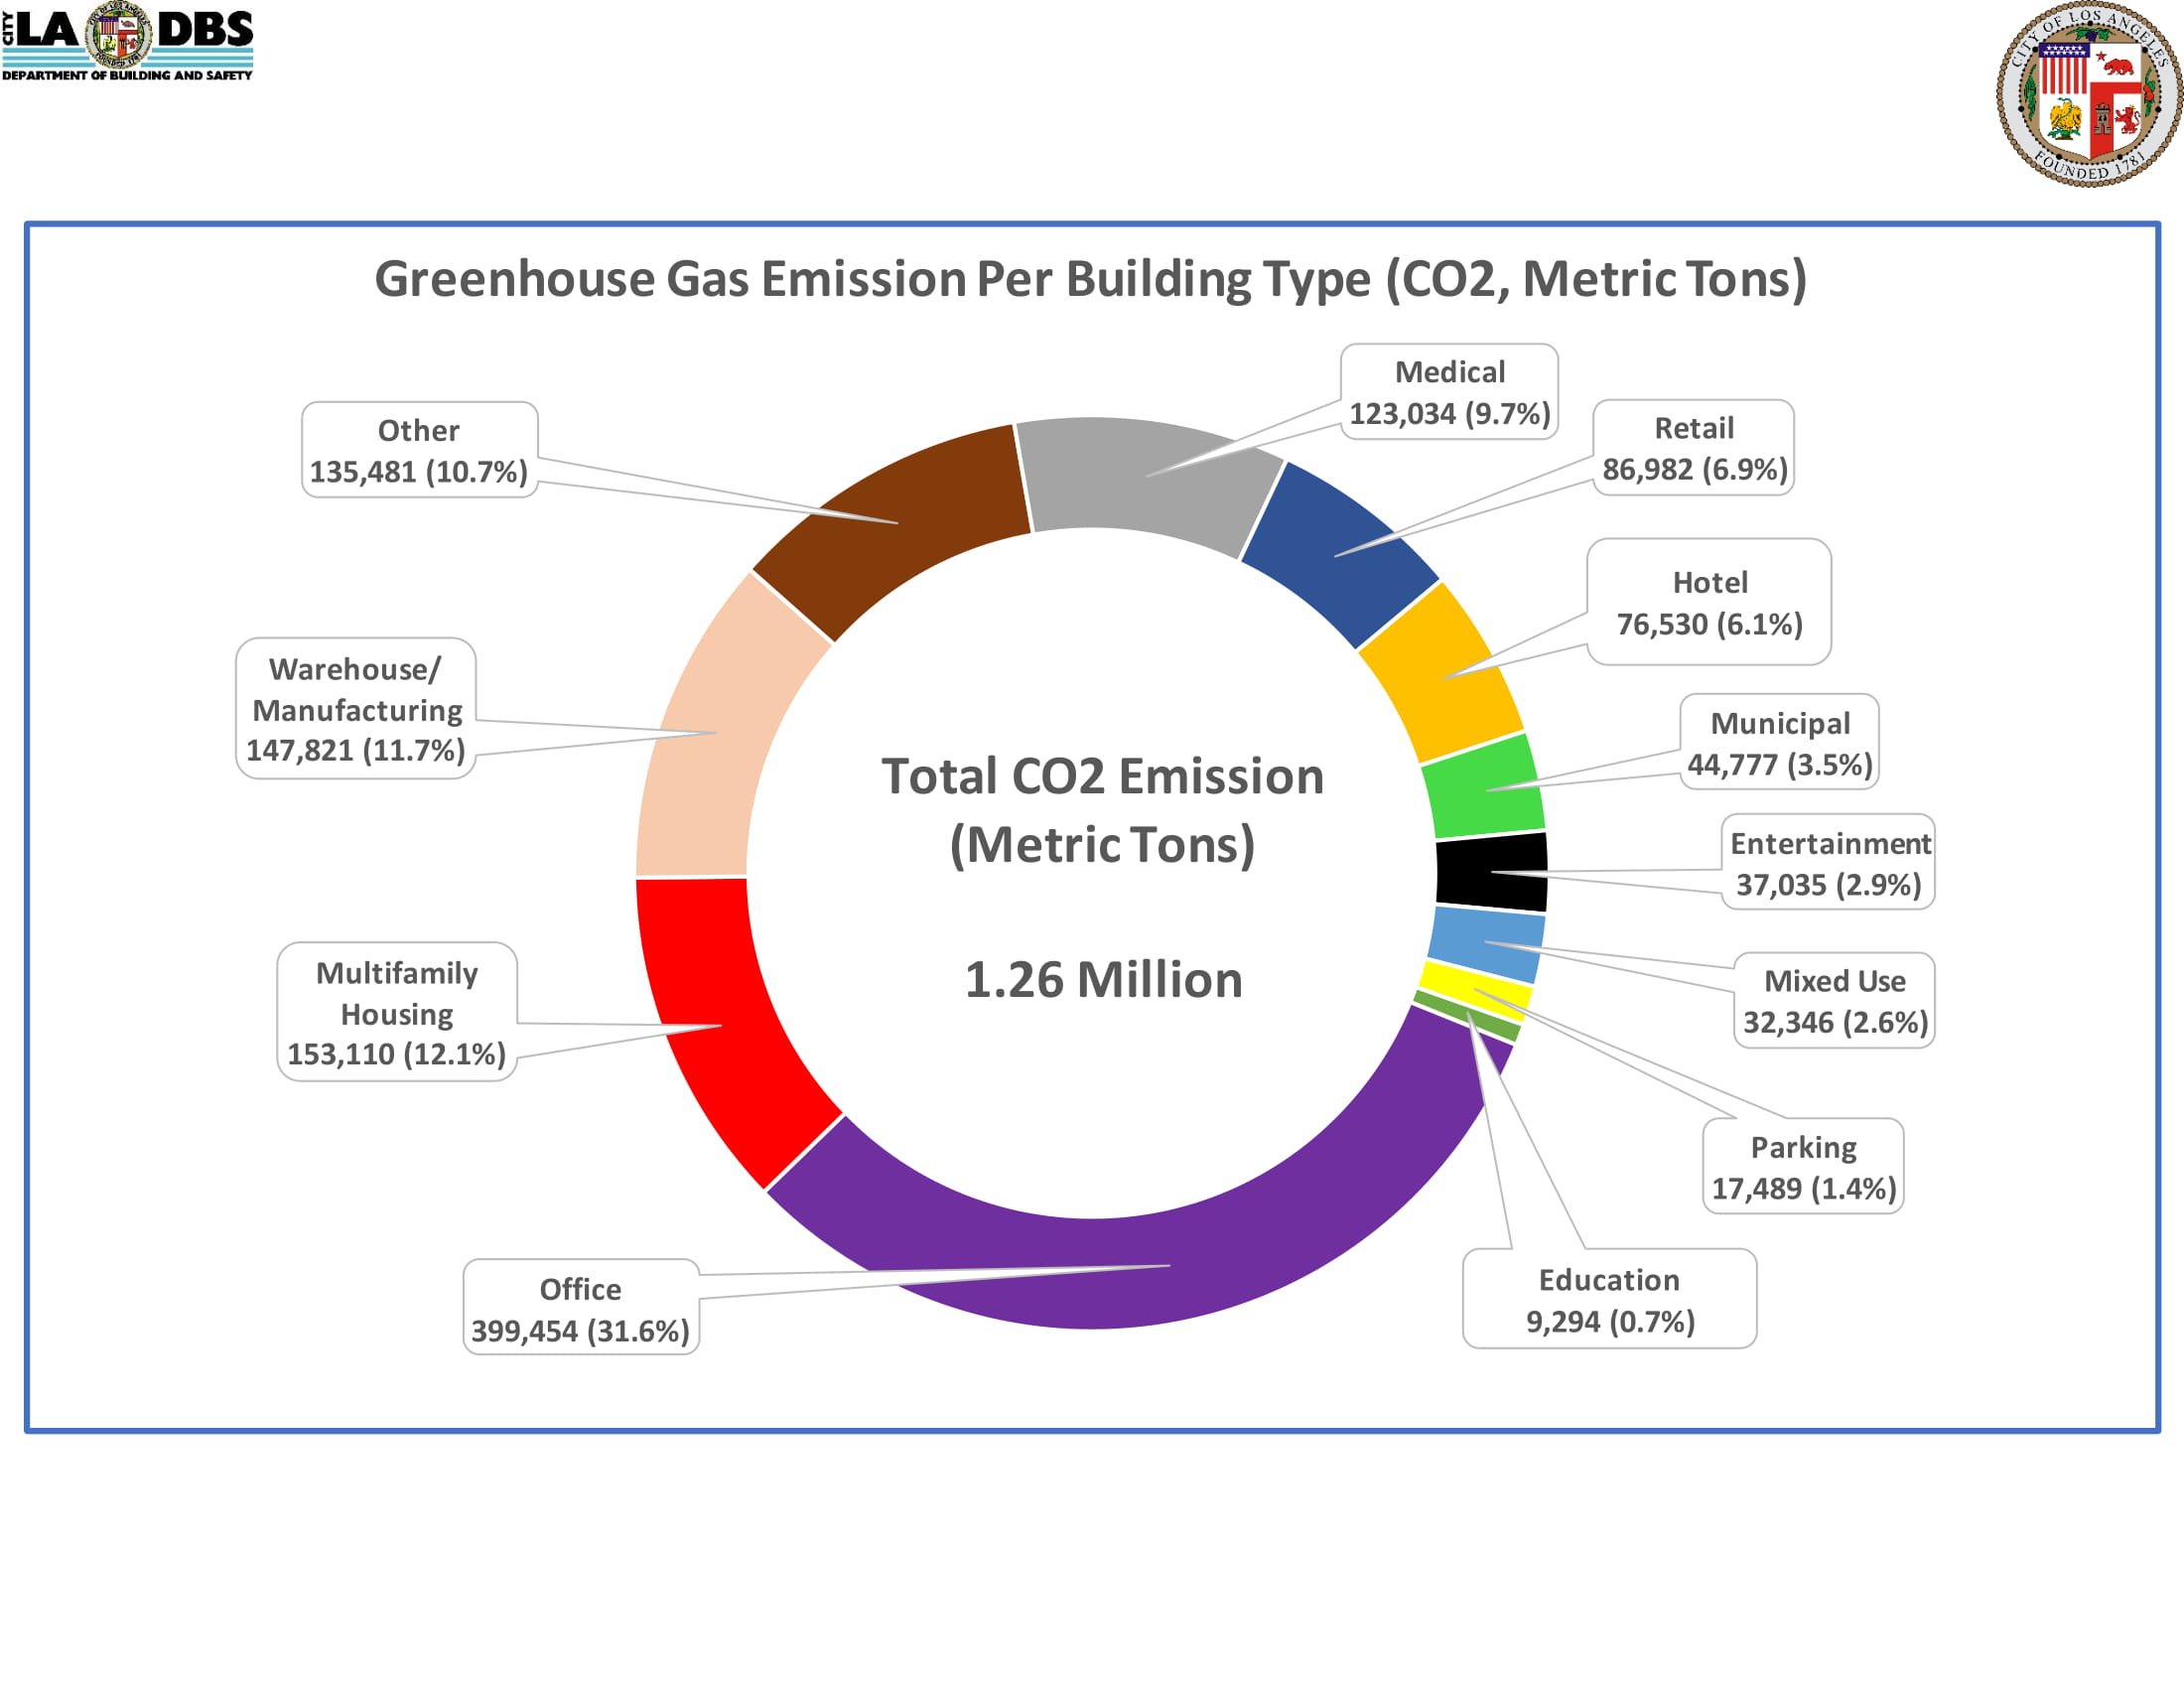 Greenhouse Gas Emission Per Building Type (CO2 Metric Tons)